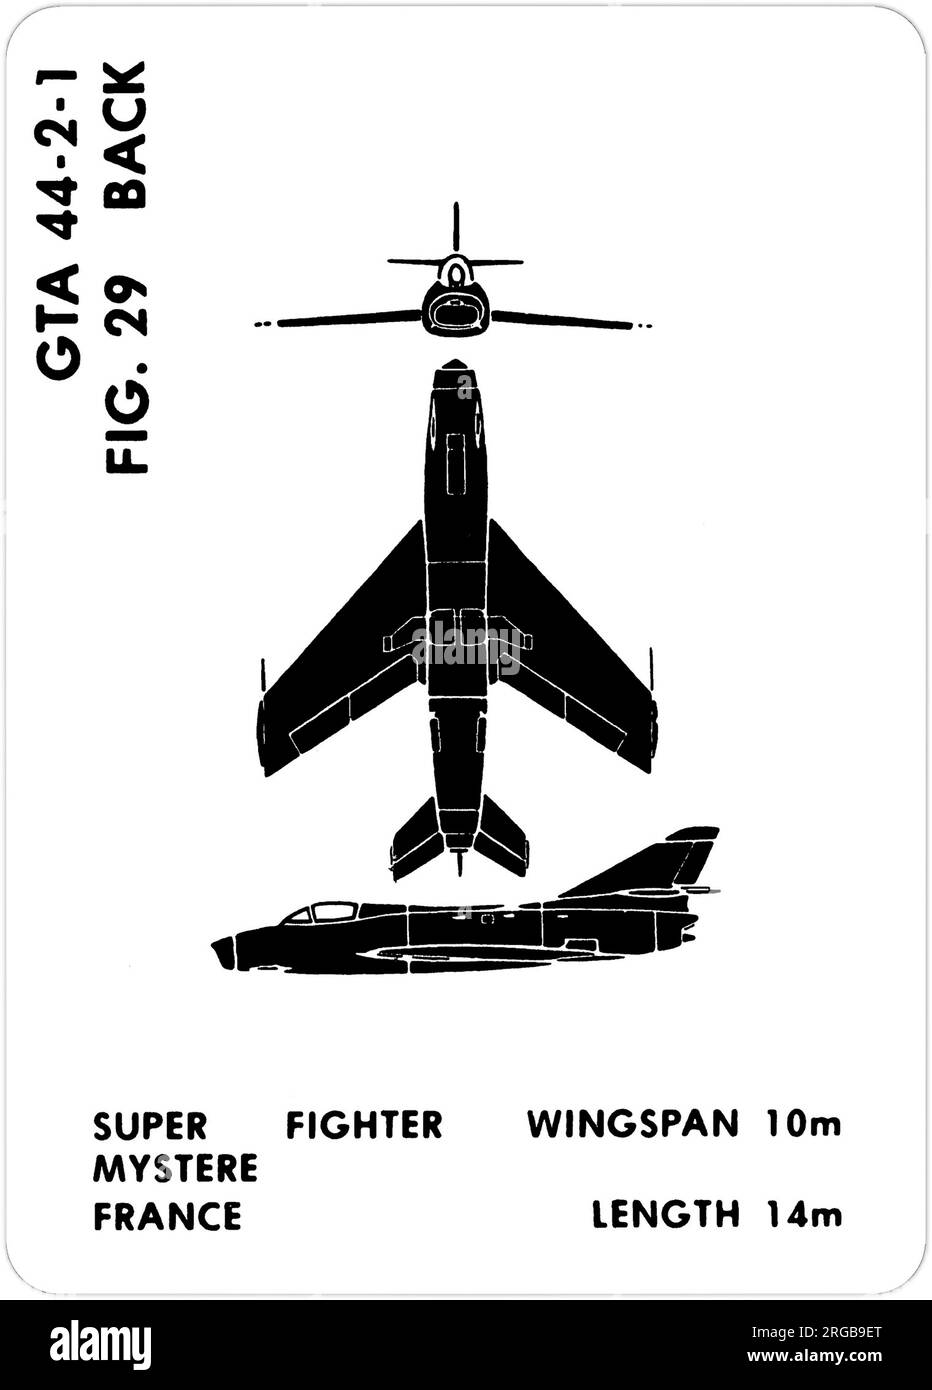 Dassault Super Mystere B2. This is one of the series of Graphics Training Aids (GTA) used by the United States Army to train their personnel to recognize friendly and hostile aircraft. This particular set, GTA 44-2-1, was issued in July1977. The set features aircraft from: Canada, Italy, United Kingdom, United States, and the USSR. Stock Photo